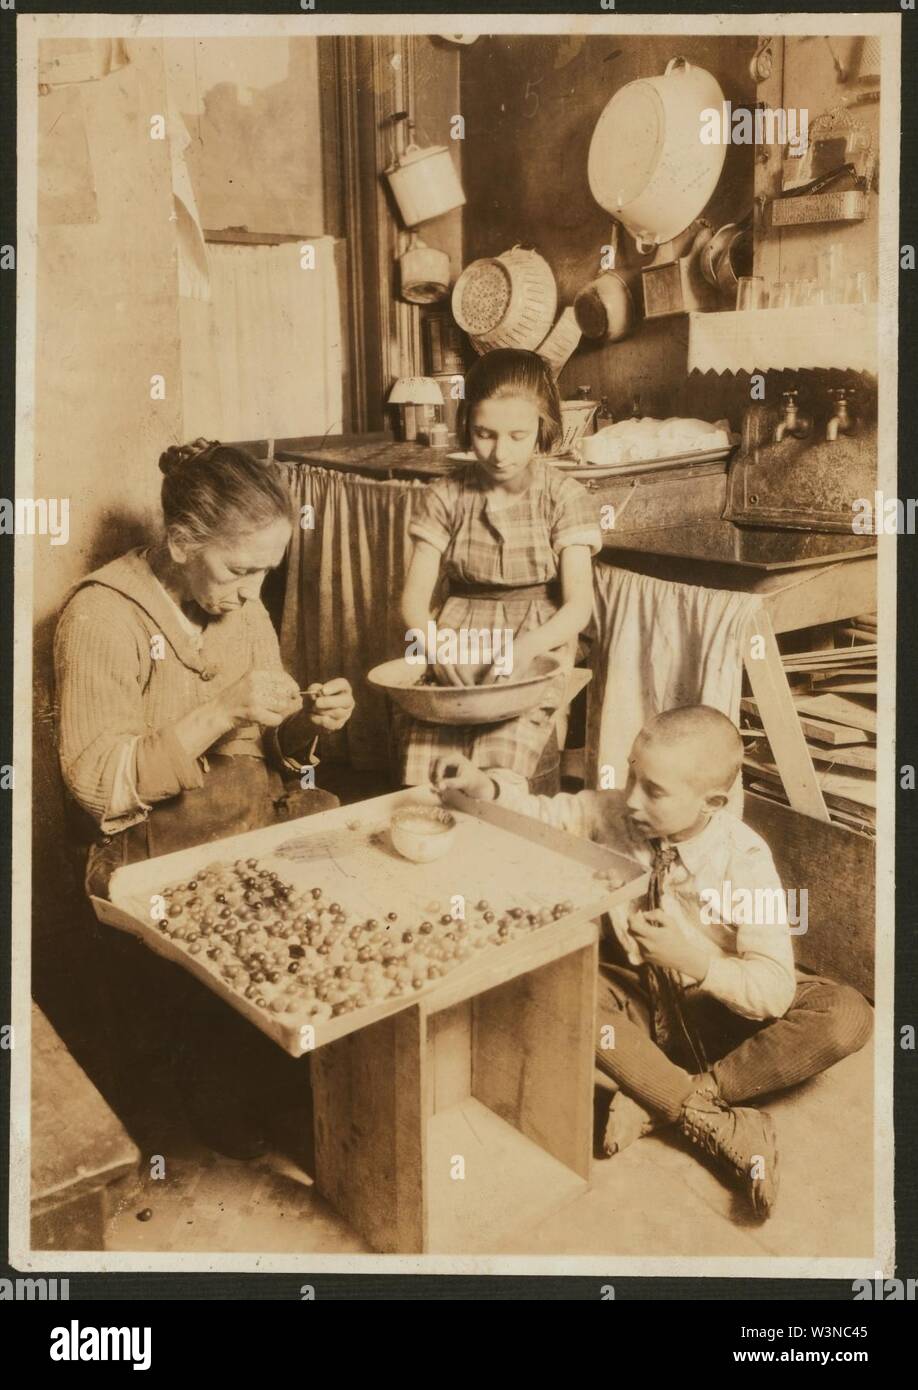 Coccaro, Angelina, 226 Thompson St., N.Y.C. Making Glass Flower Bulbs, earn about 75 cents to a $1.50 a day. Elizabeth age 10 yrs., and Frank age 8 yrs., very small and anemic. Taken by Stock Photo